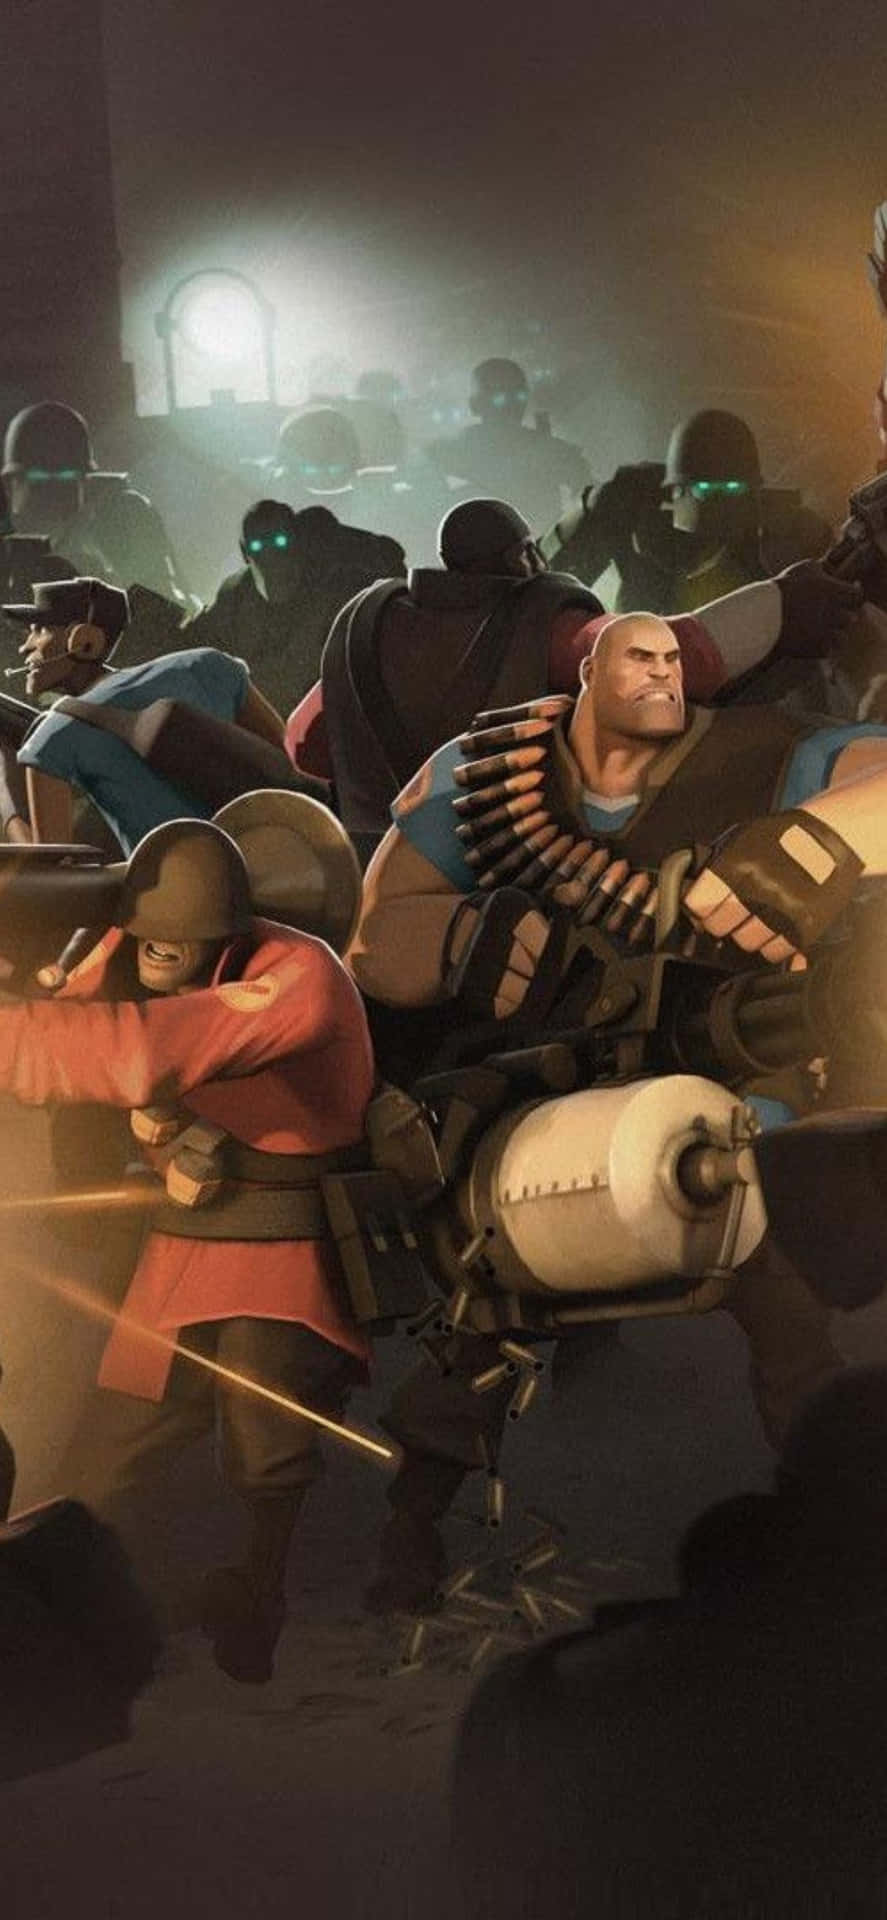 iPhone XS Team Fortress 2 Warzone Background